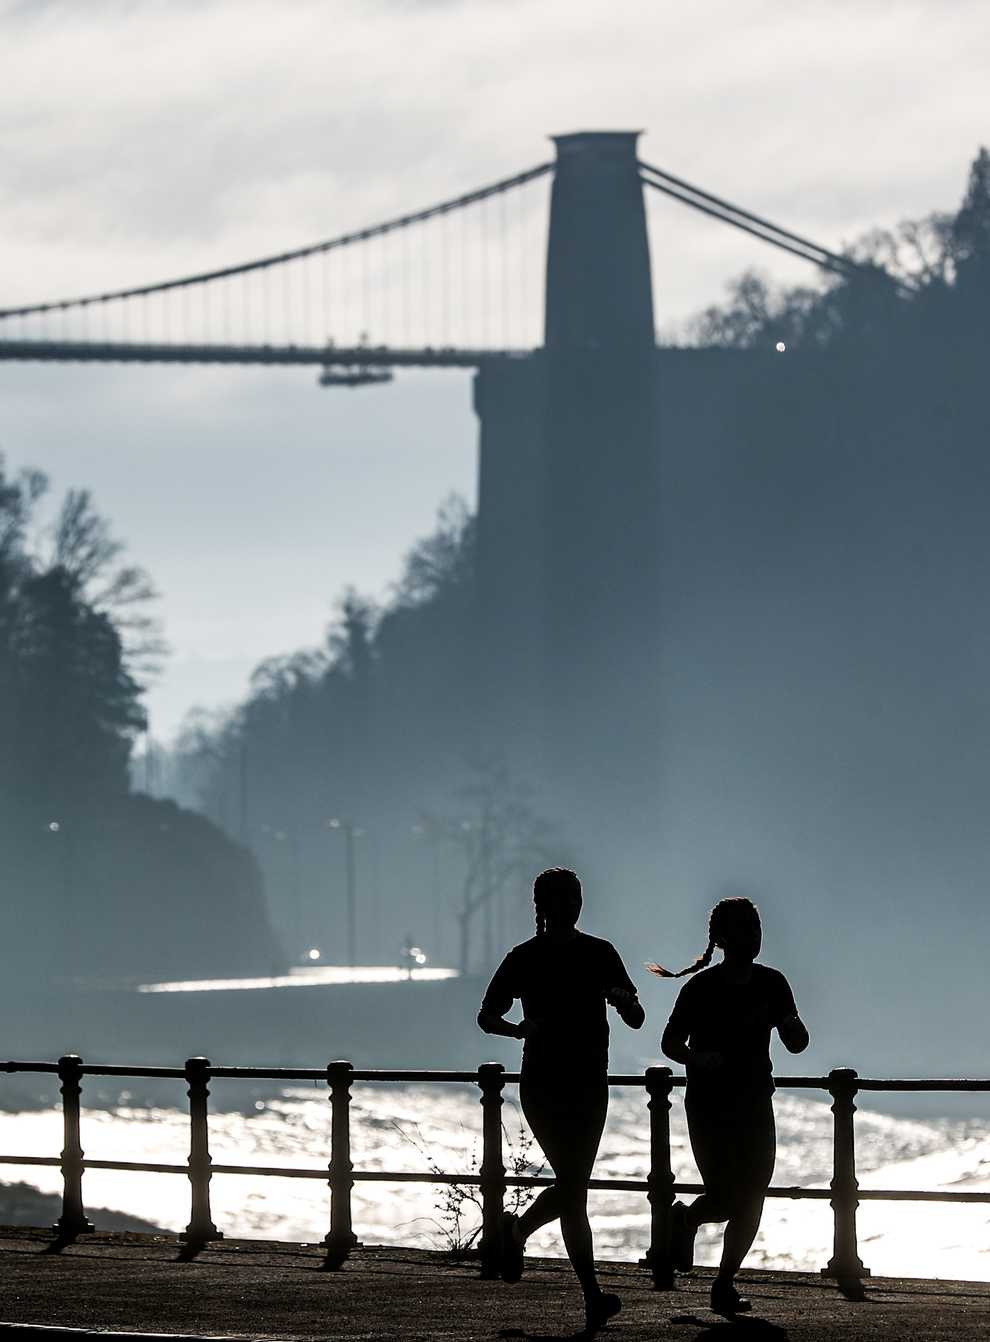 Joggers exercising along the River Avon in Bristol